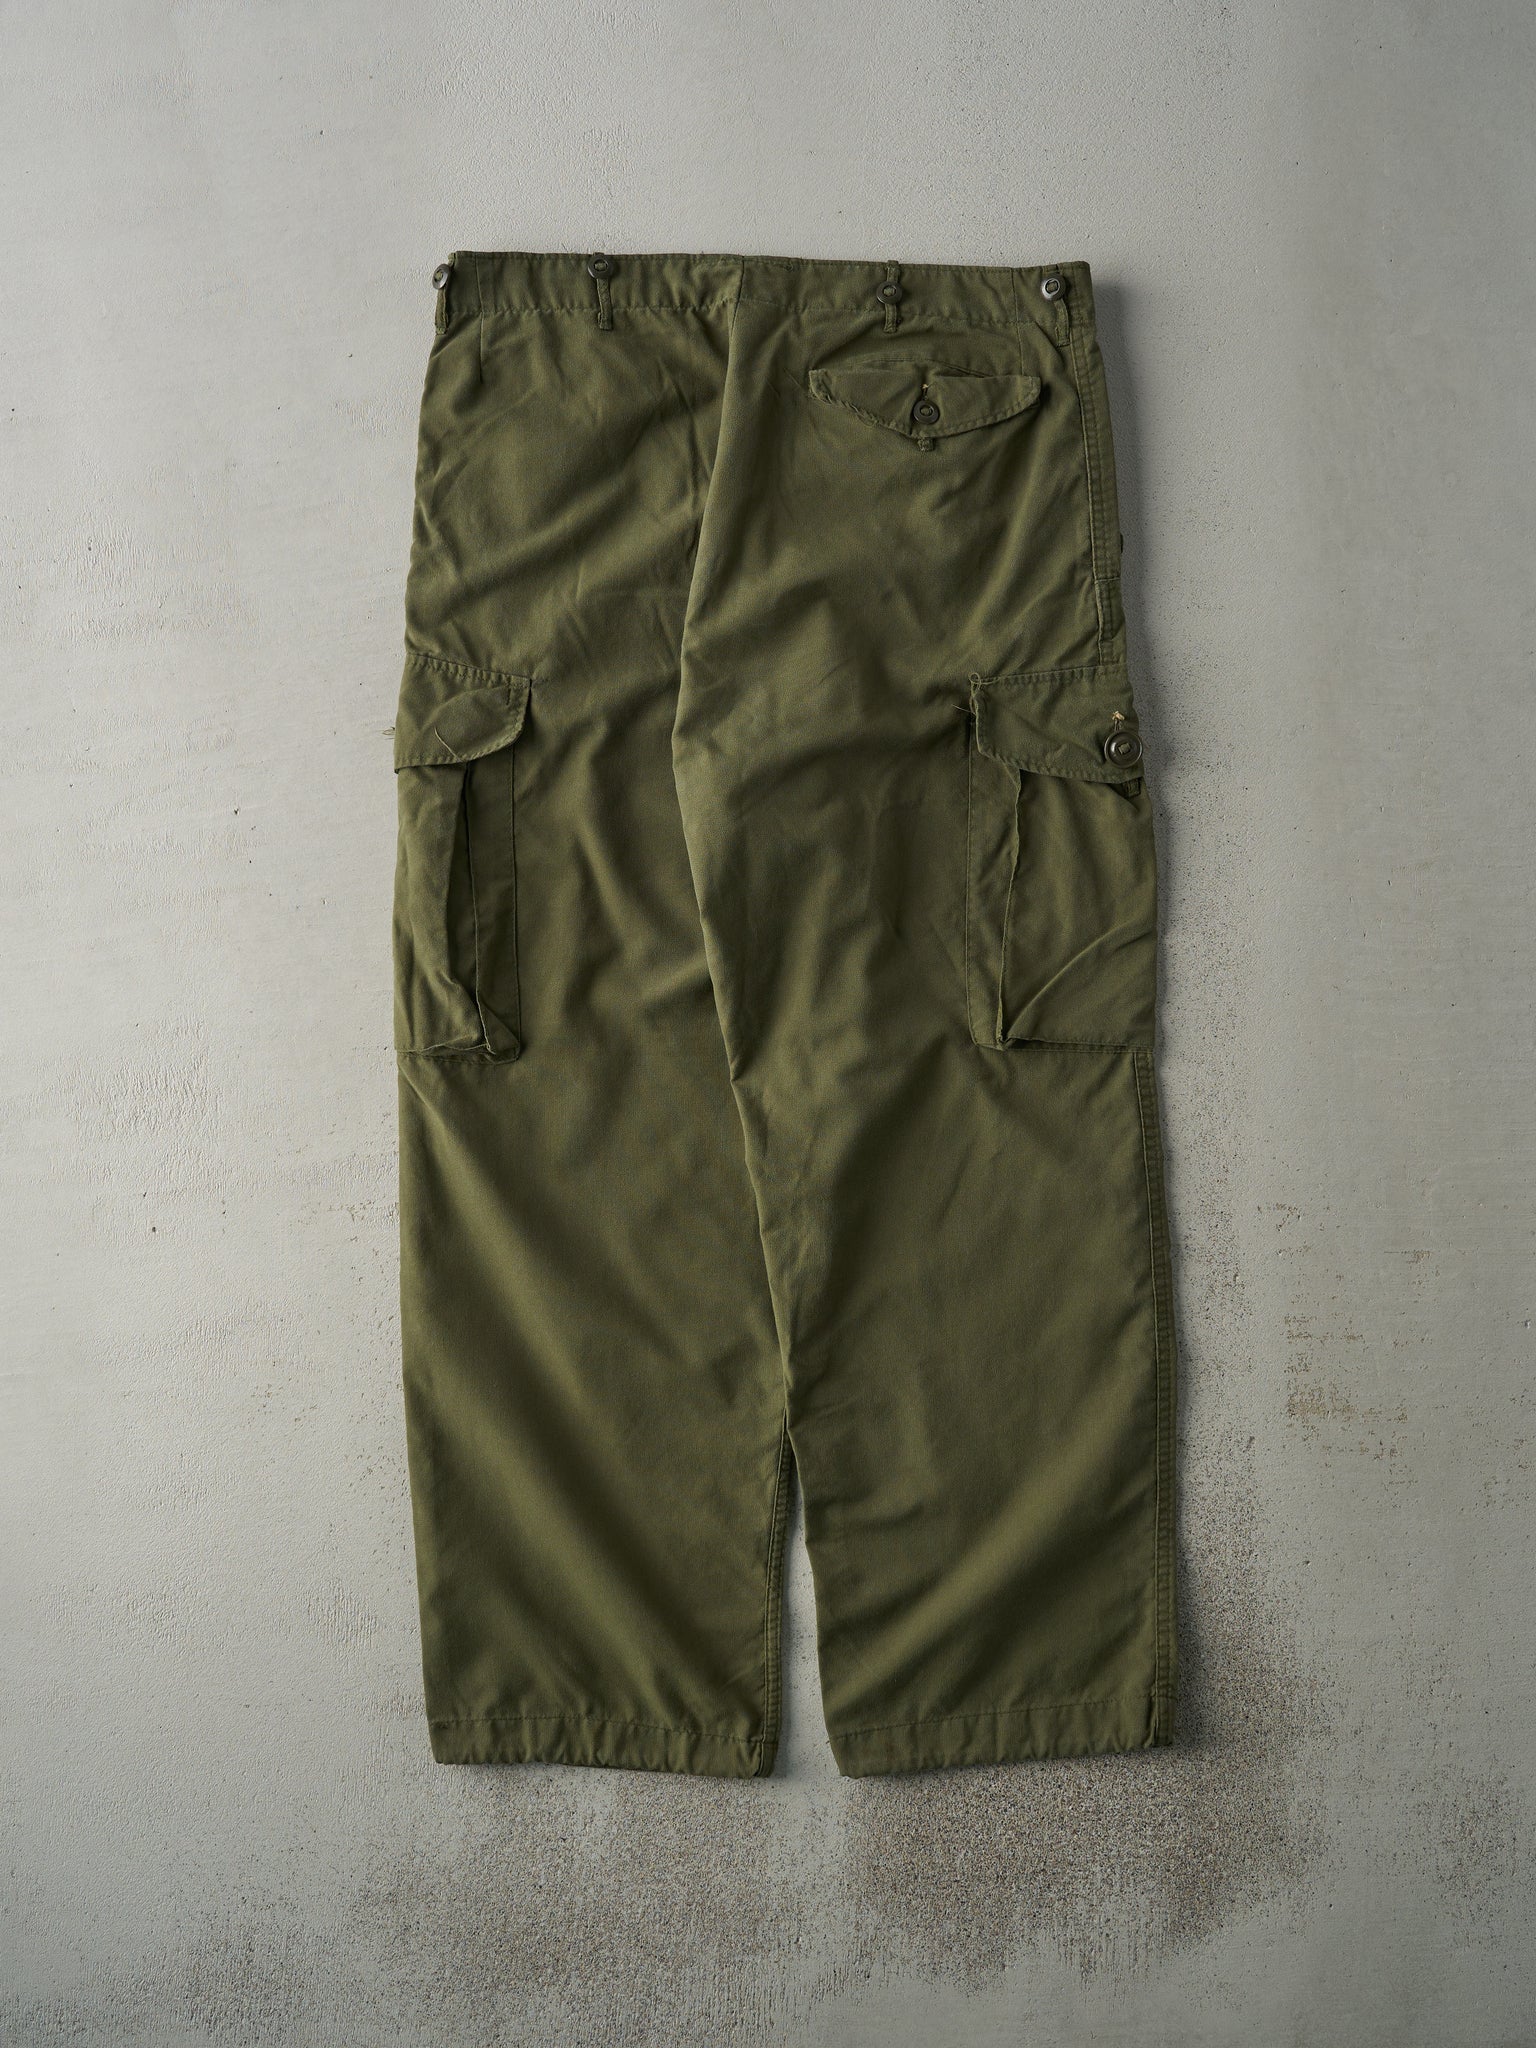 Vintage 90s Army Green Military Parachute Pants (38x31)